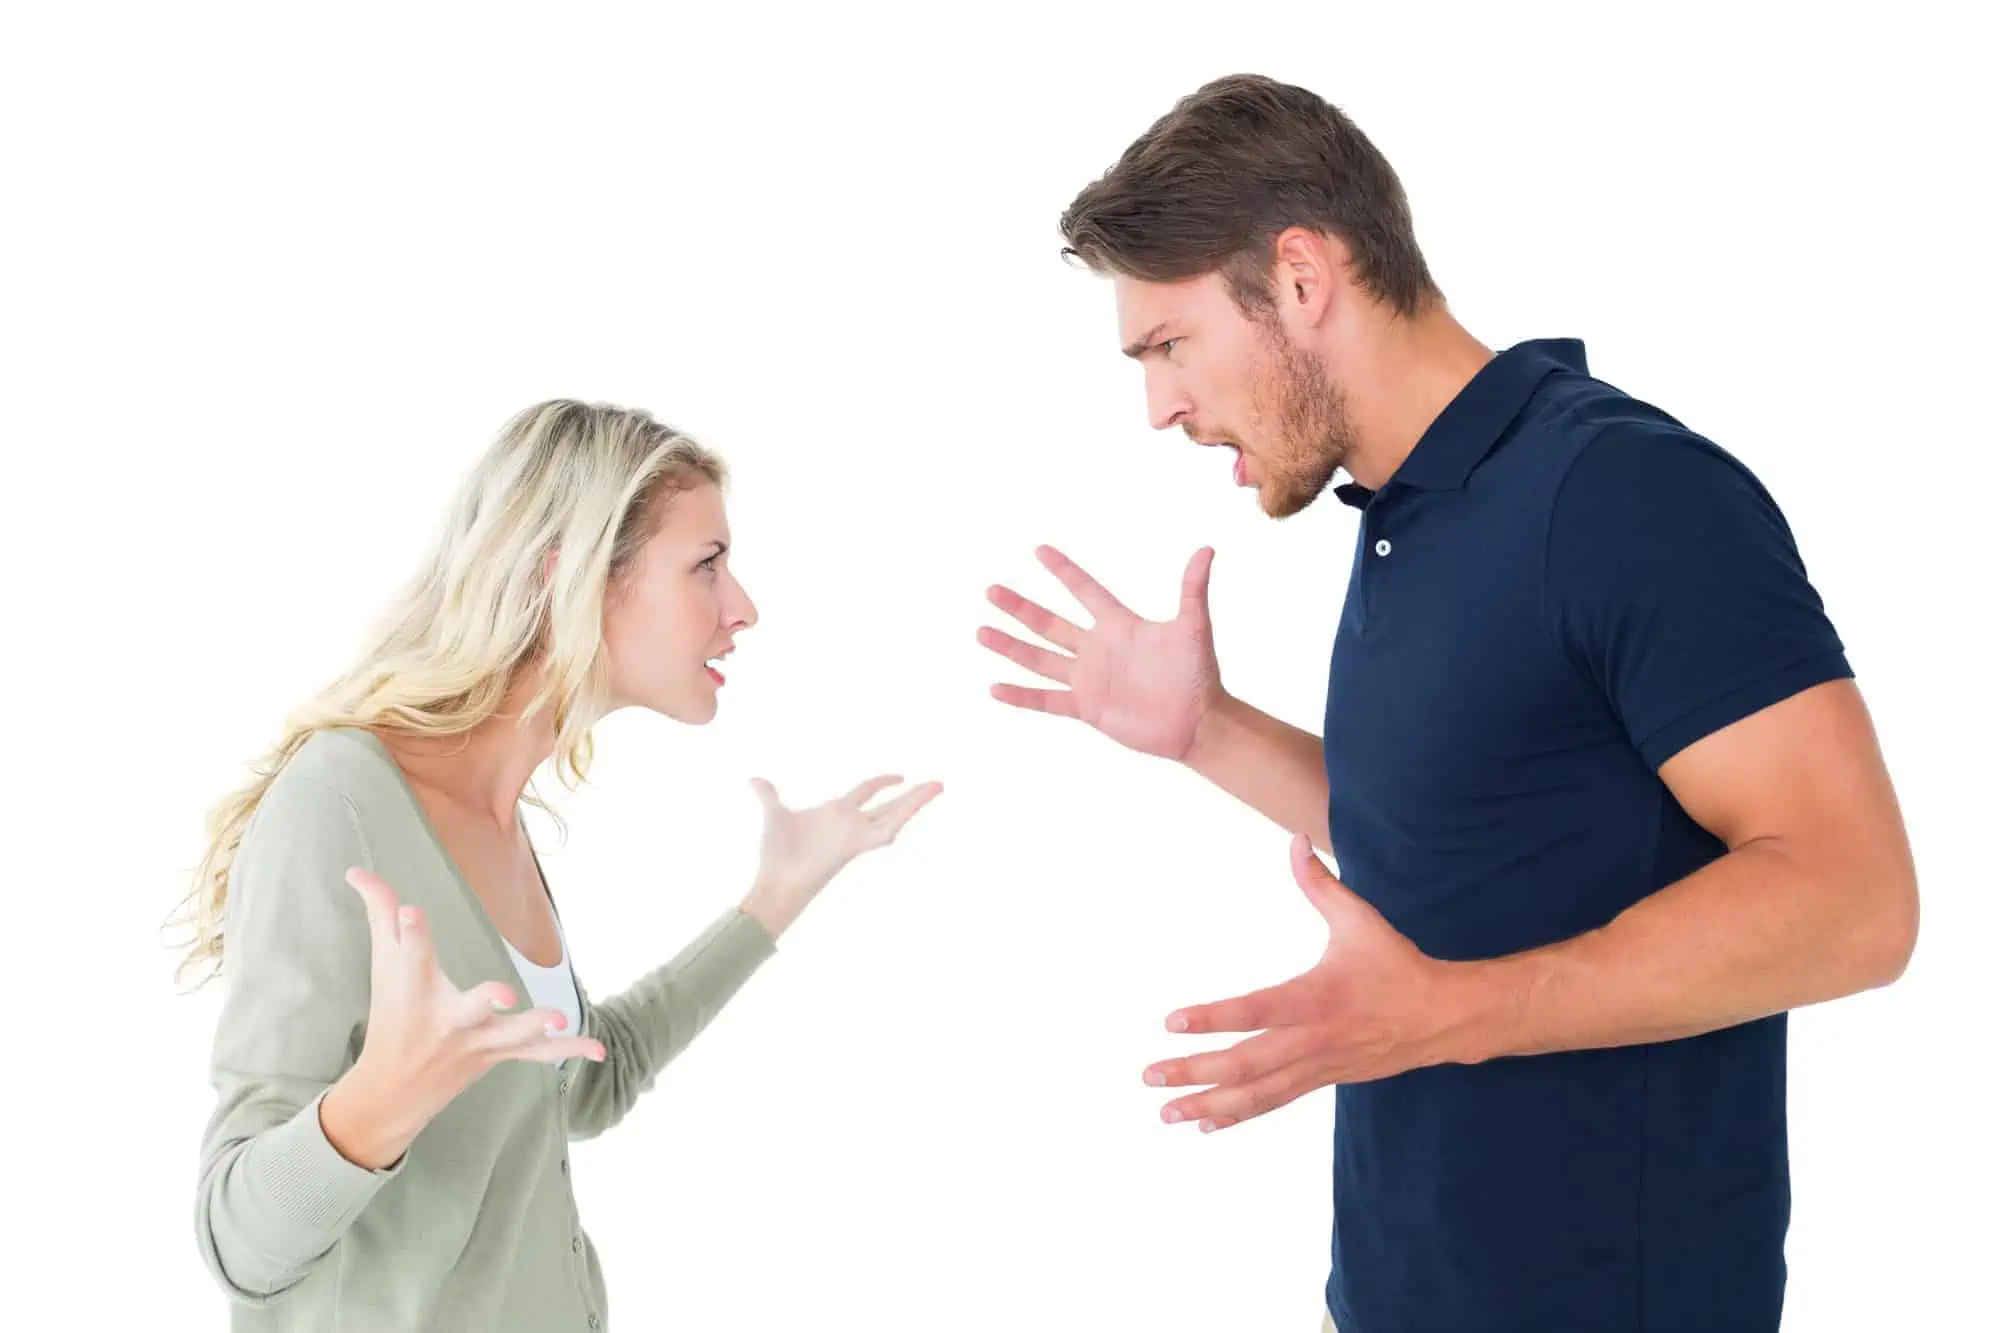 A man standing next to a woman who is screaming